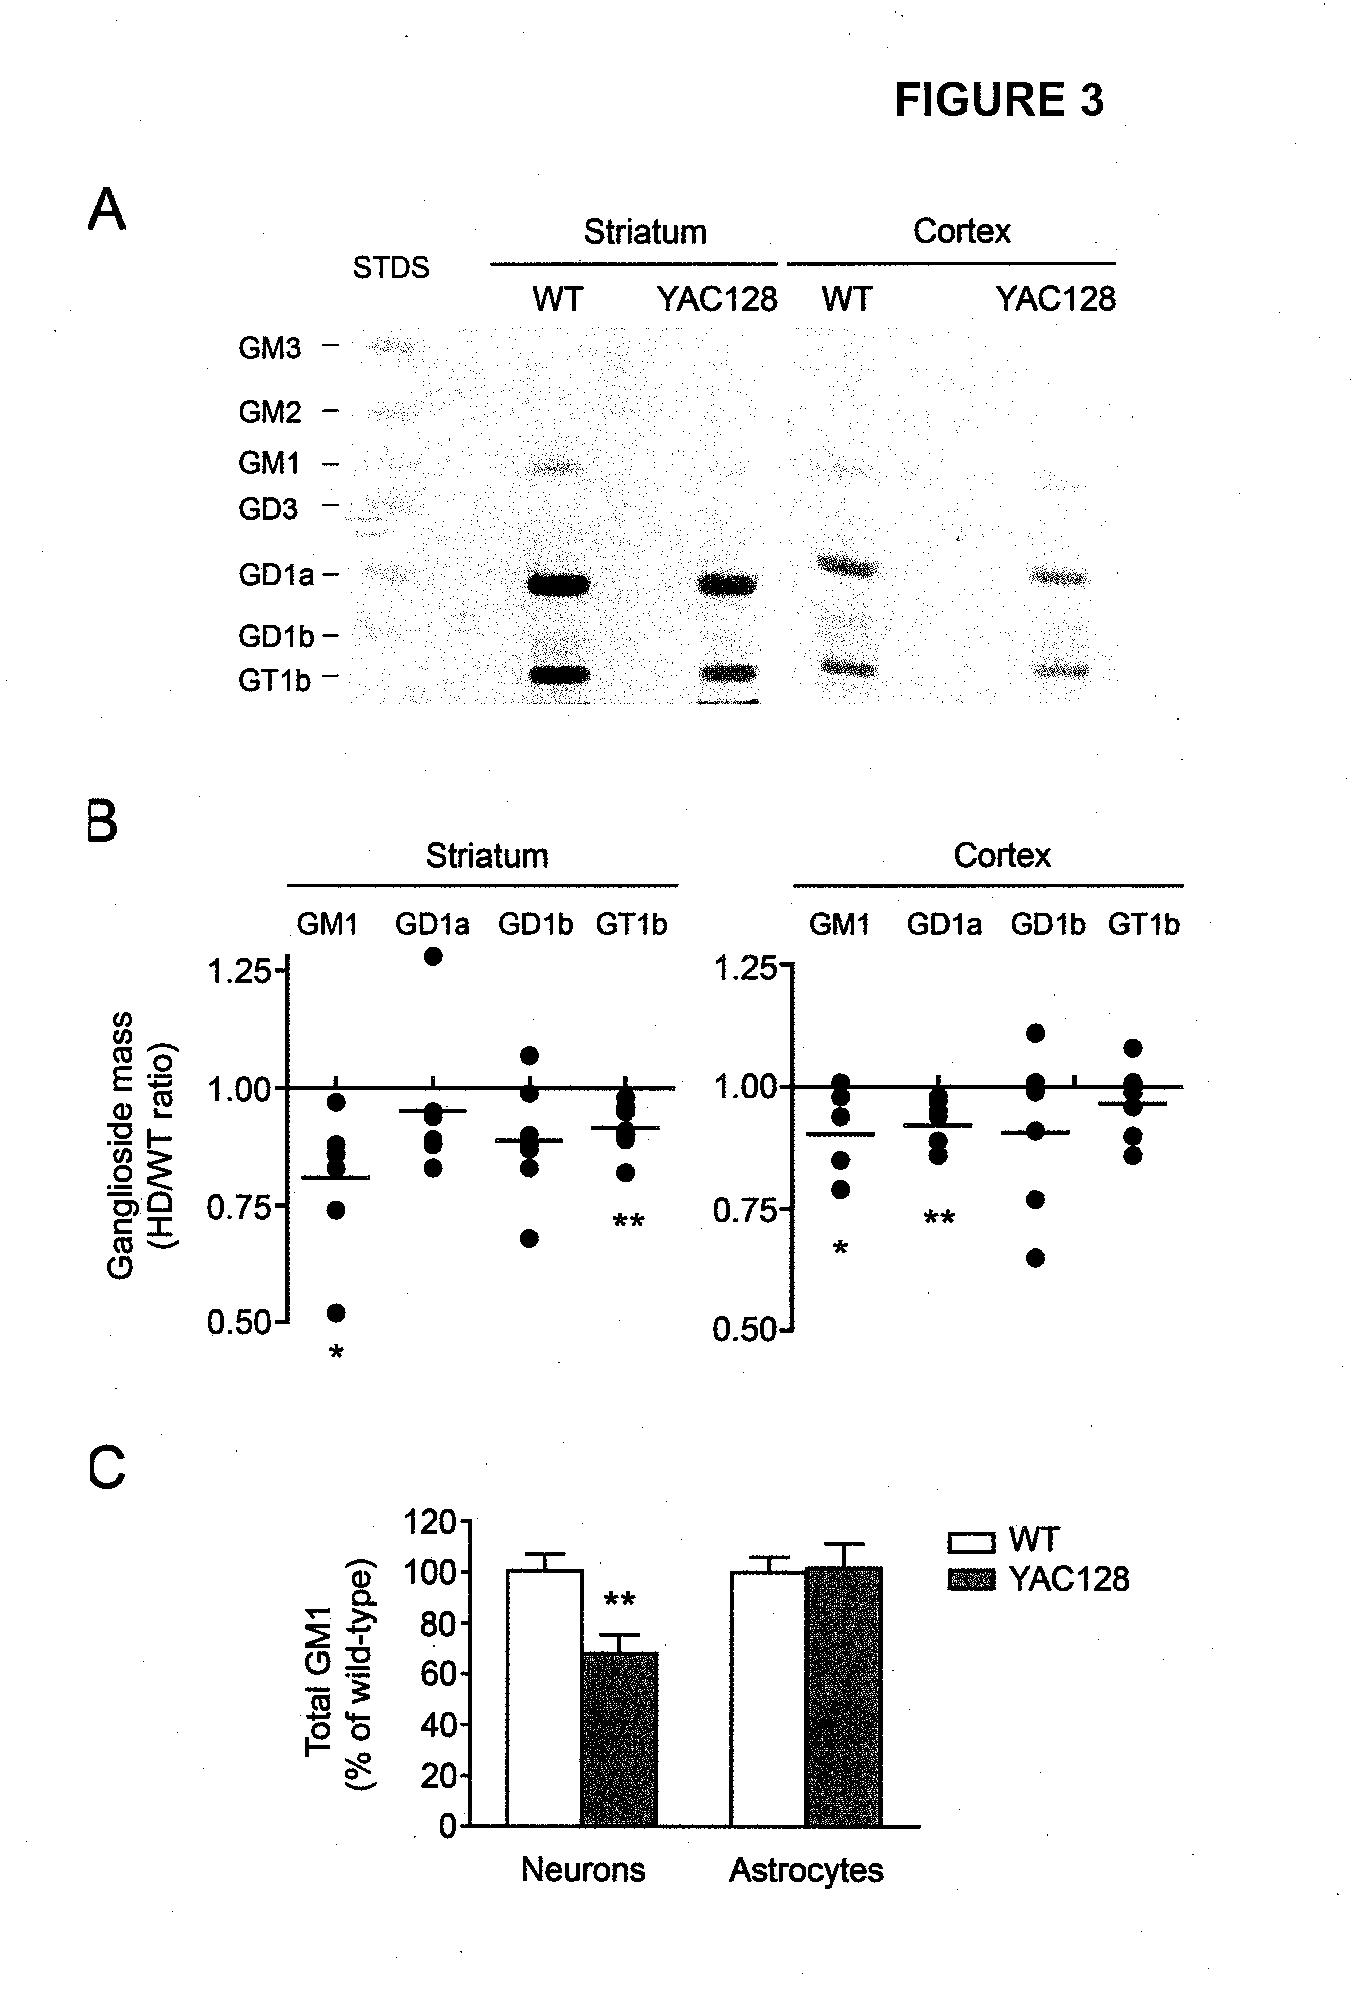 Neuroprotective ganglioside compositions for use in treating or diagnosing huntington's disease